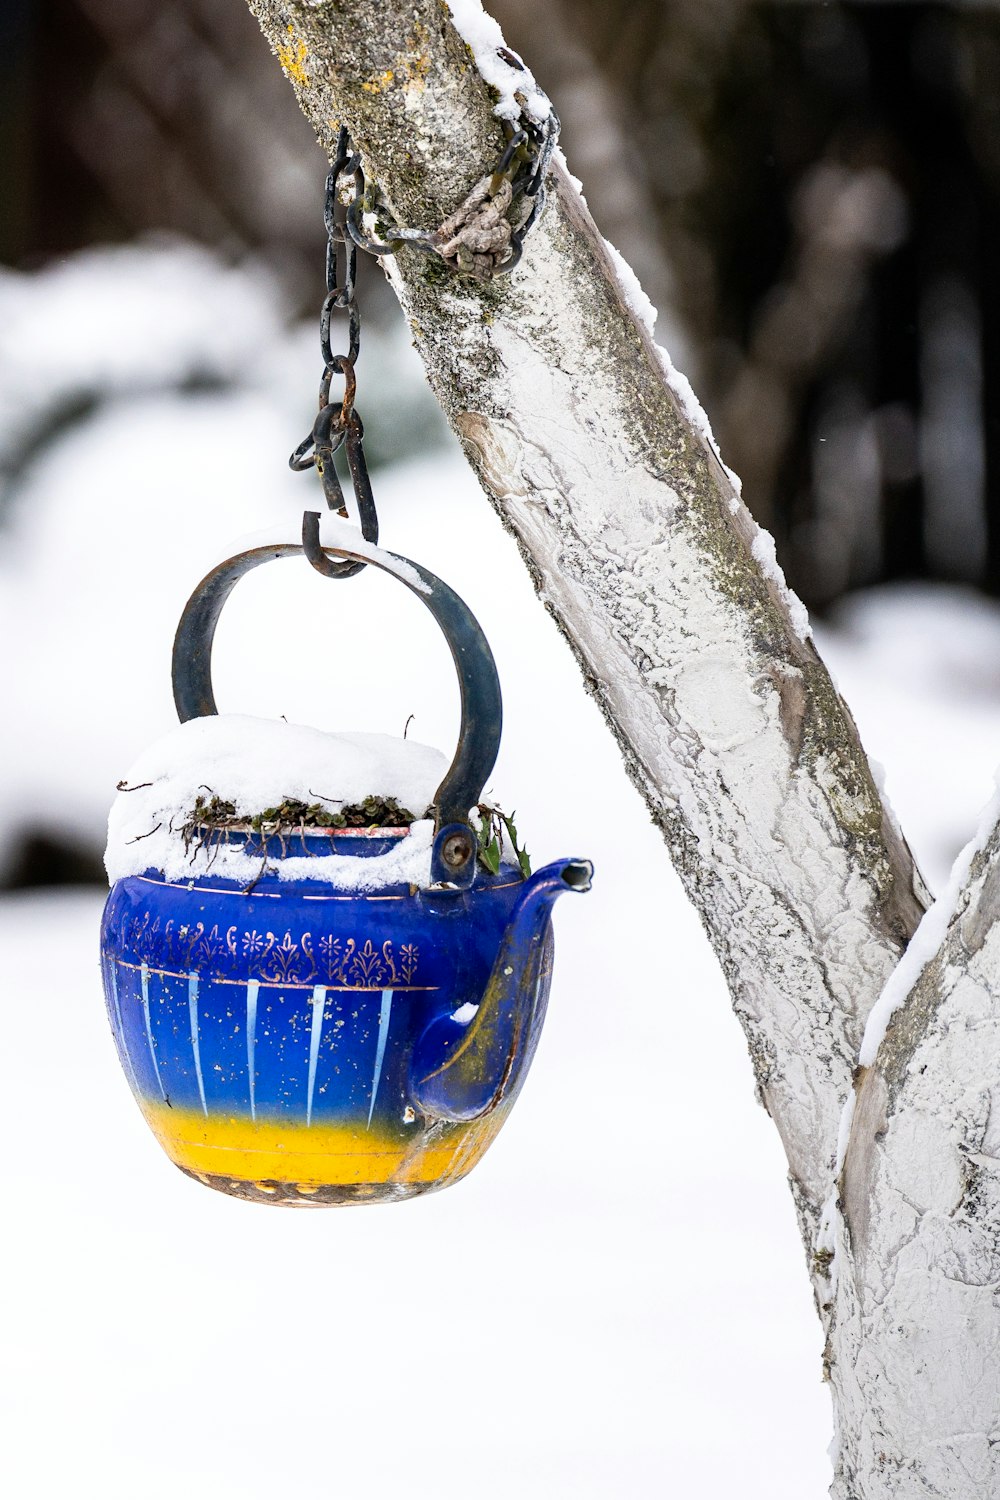 a blue tea pot hanging from a tree branch